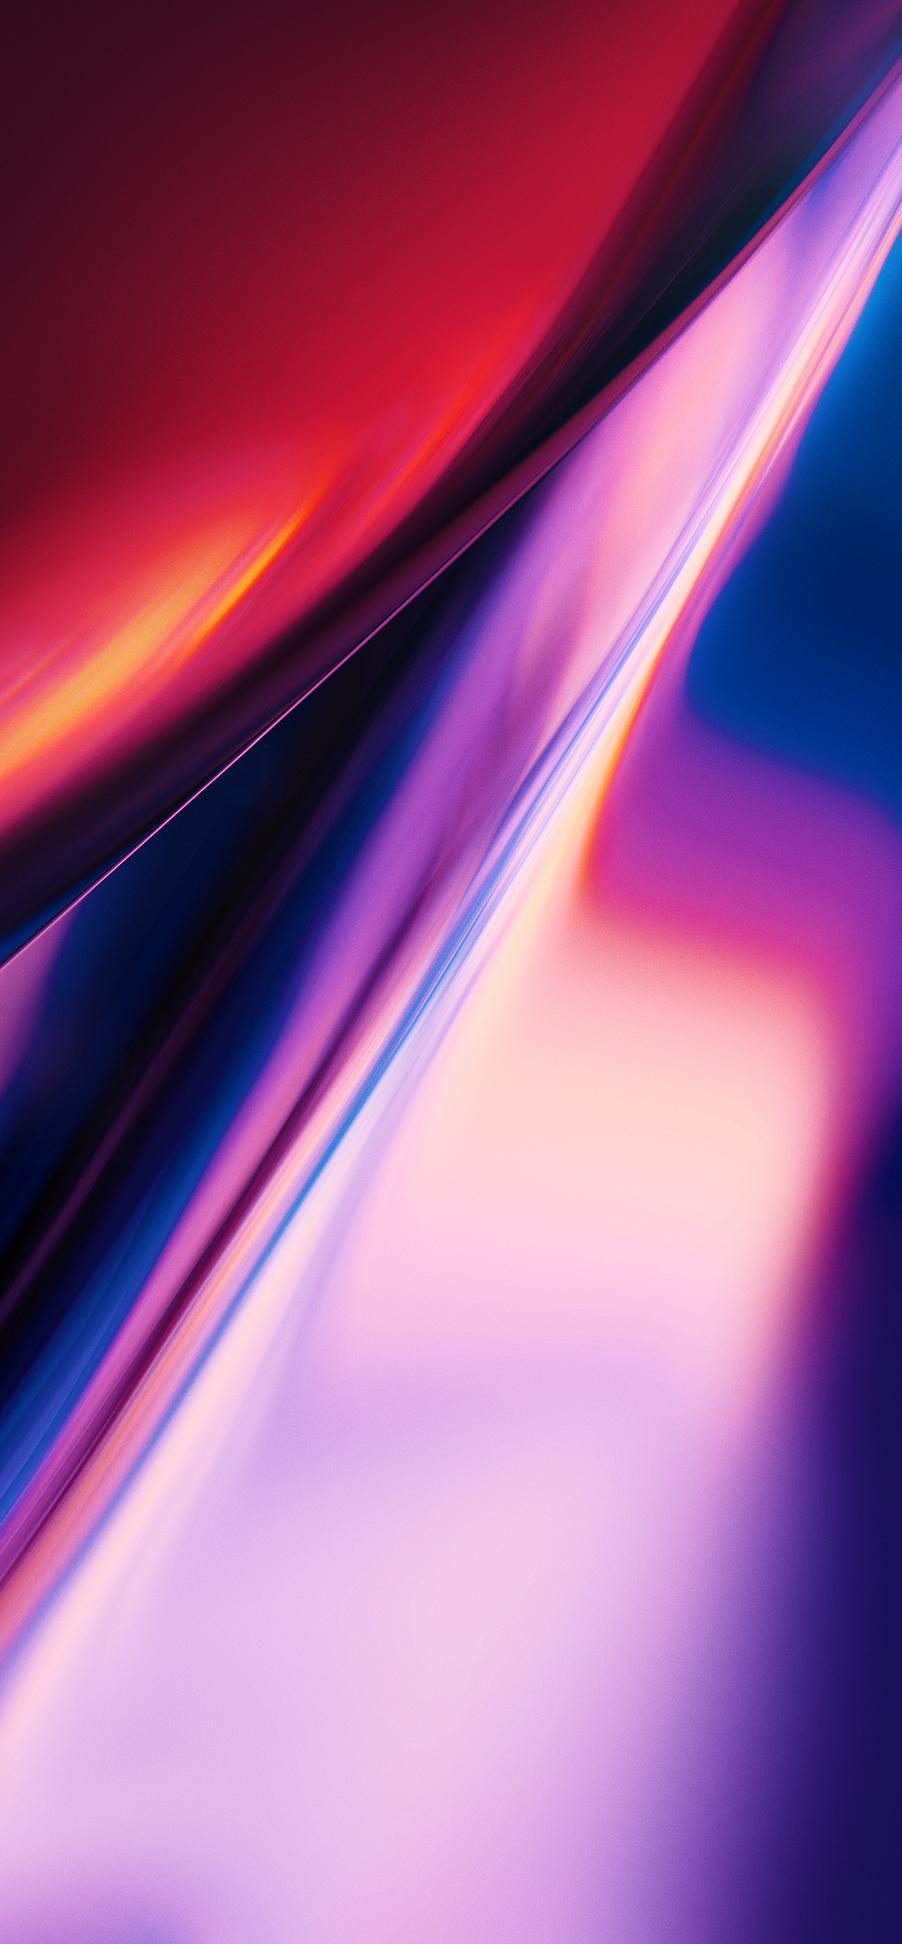 OnePlus 7 Series & Abstruct Wallpaper App Released!